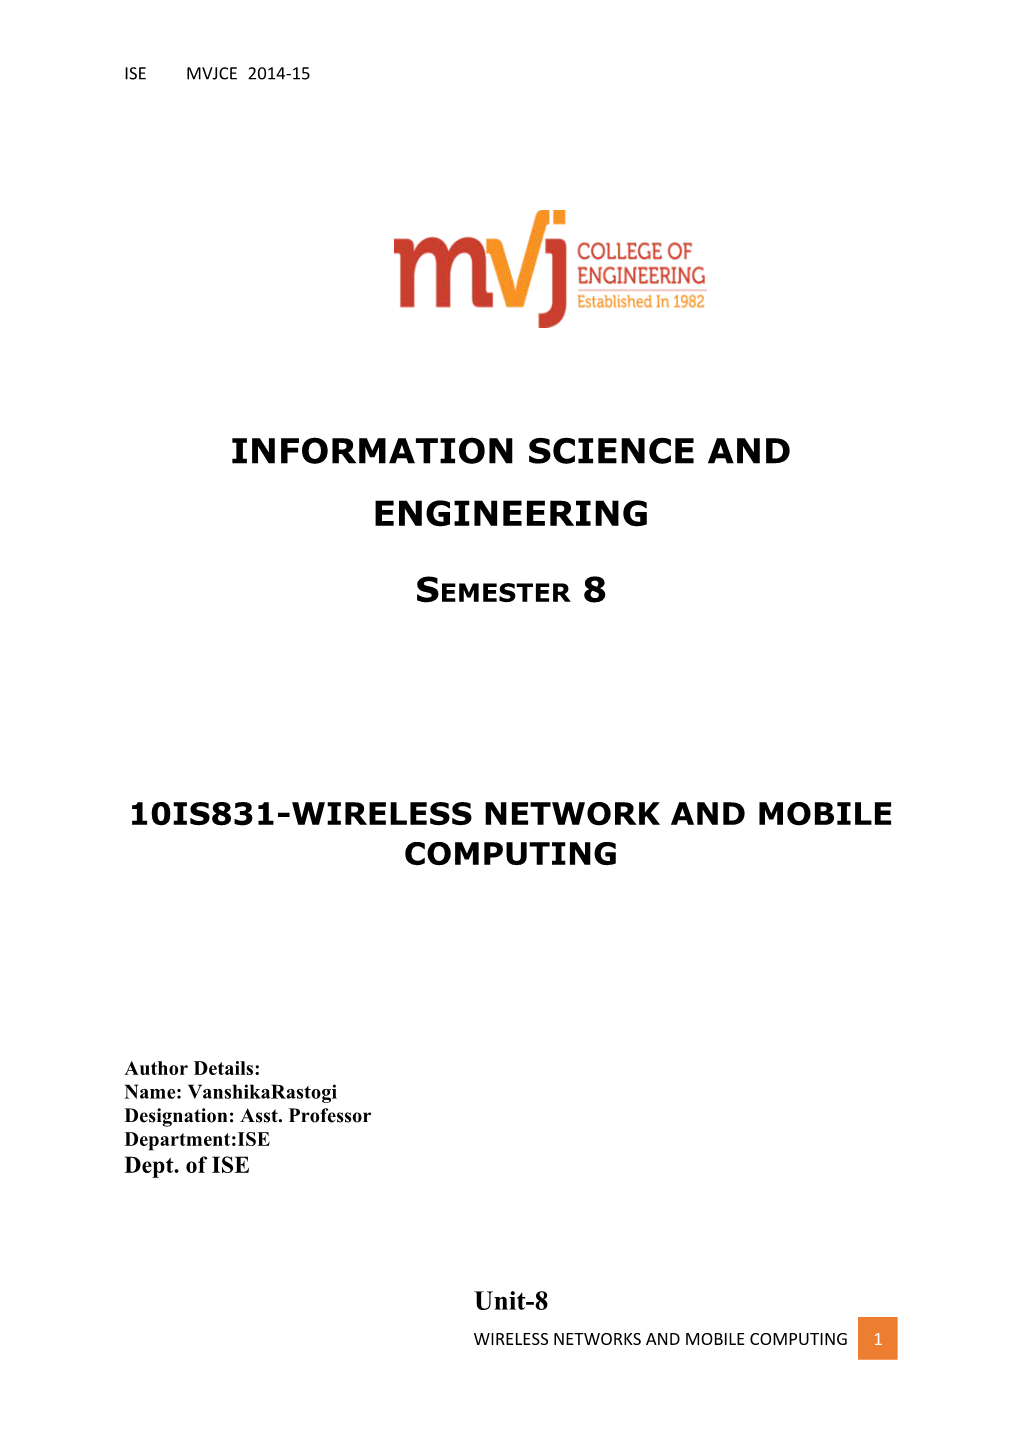 Information Science and Engineering